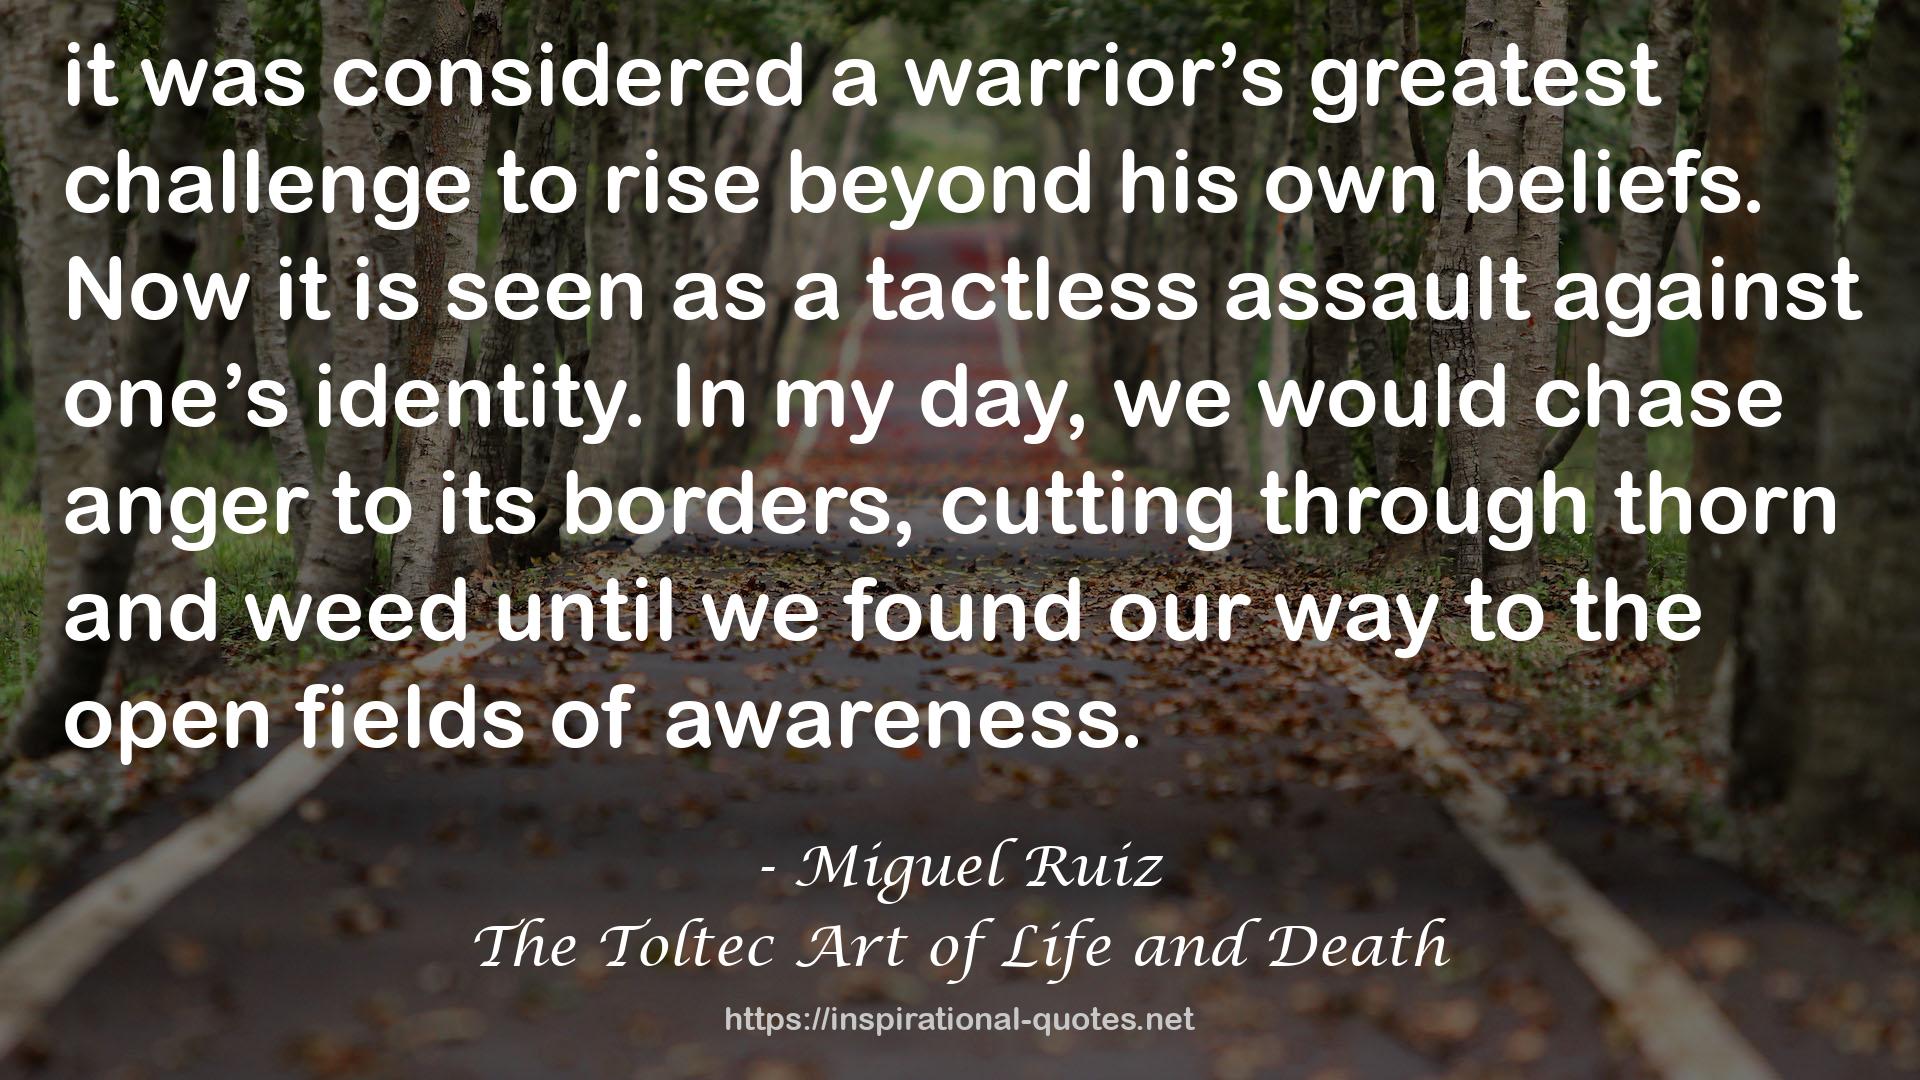 The Toltec Art of Life and Death QUOTES